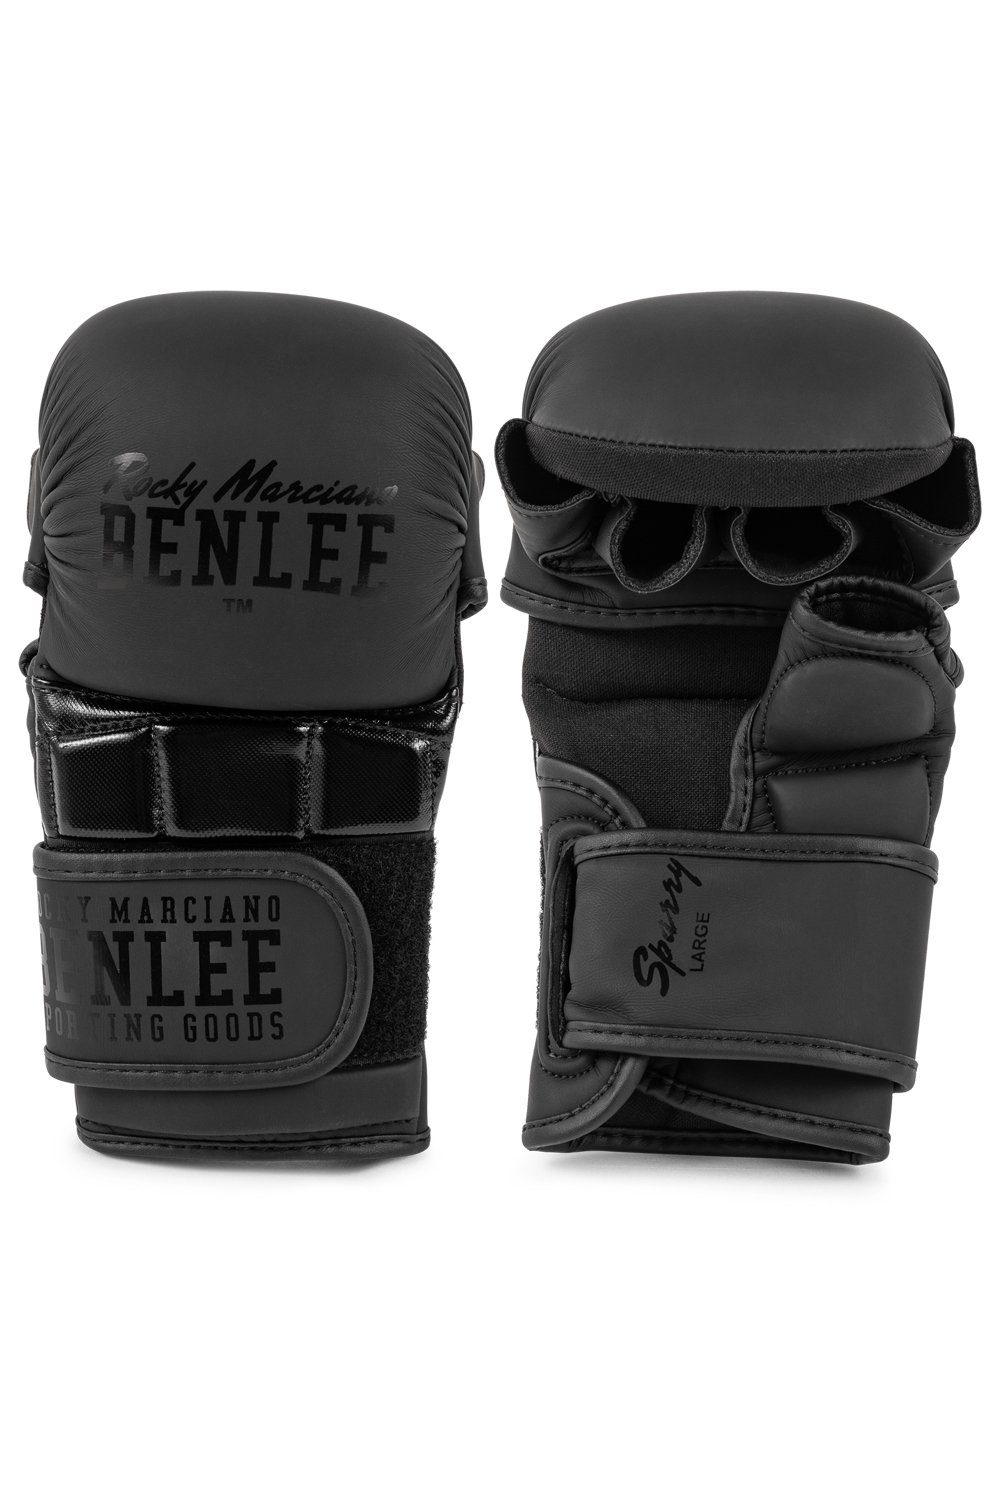 Boxhandschuhe Rocky Benlee Marciano SPARRY